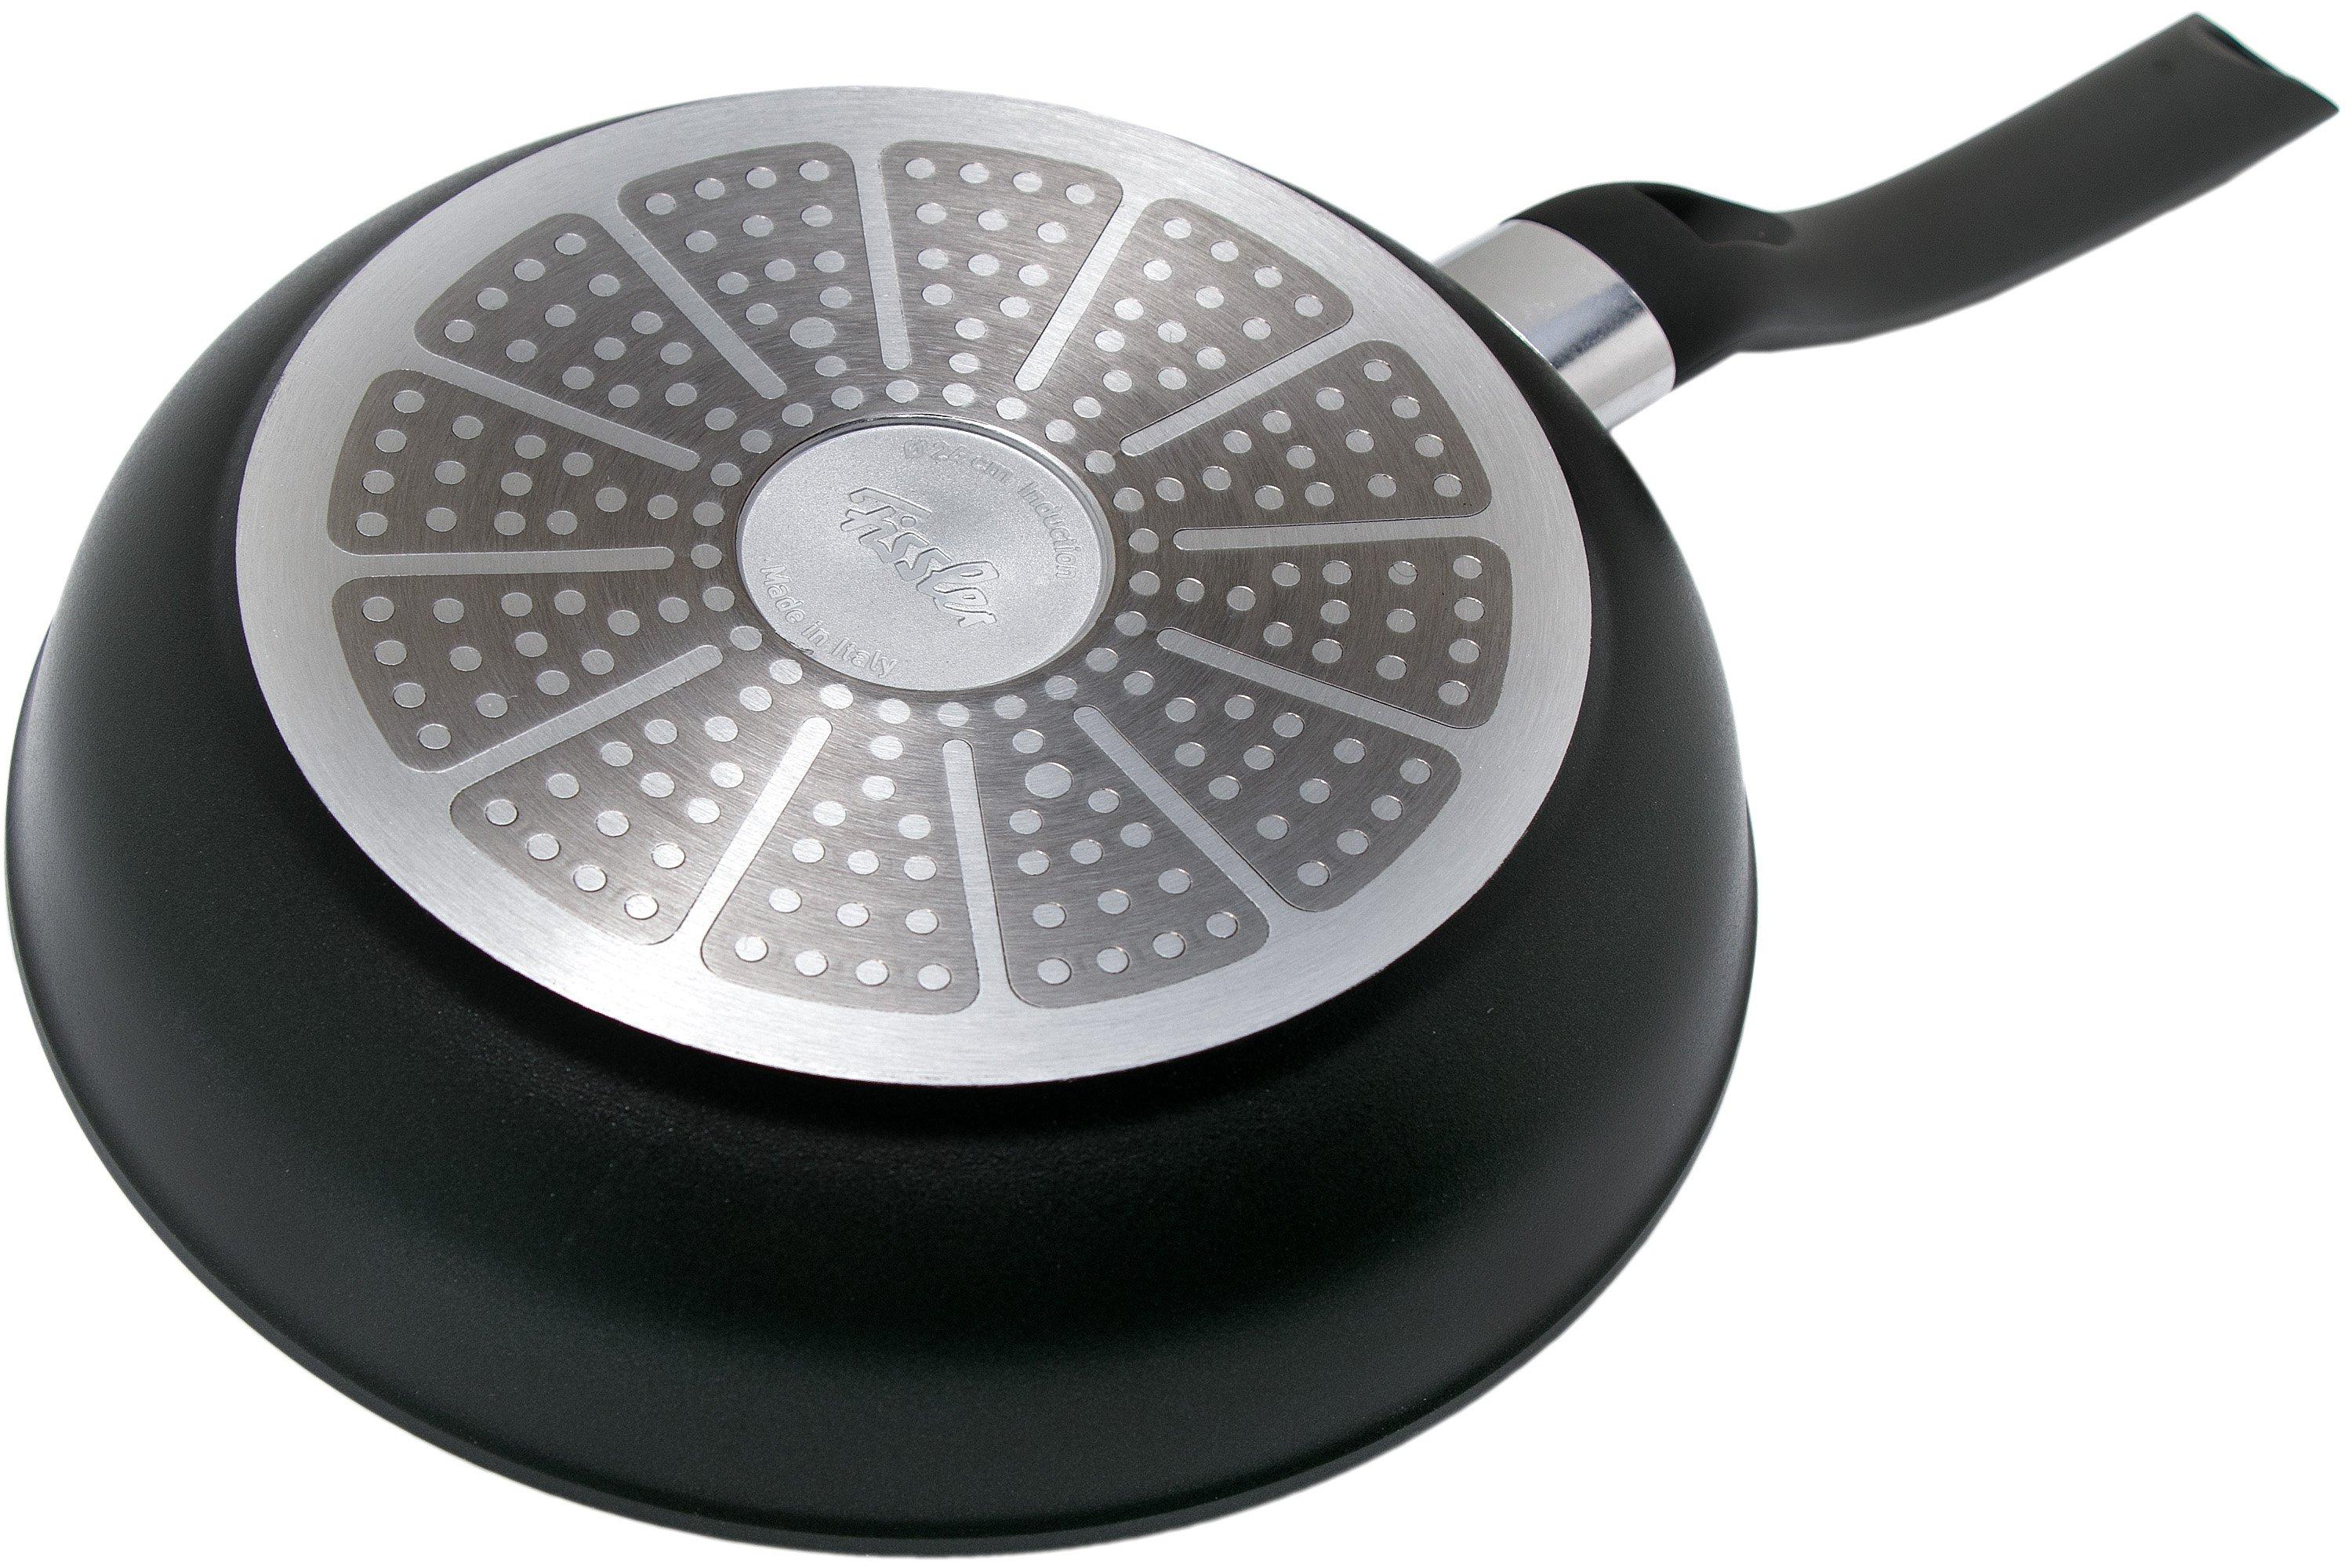 045-301-24-100, Cenit pan Induction cm | Fissler 24 shopping frying at Advantageously